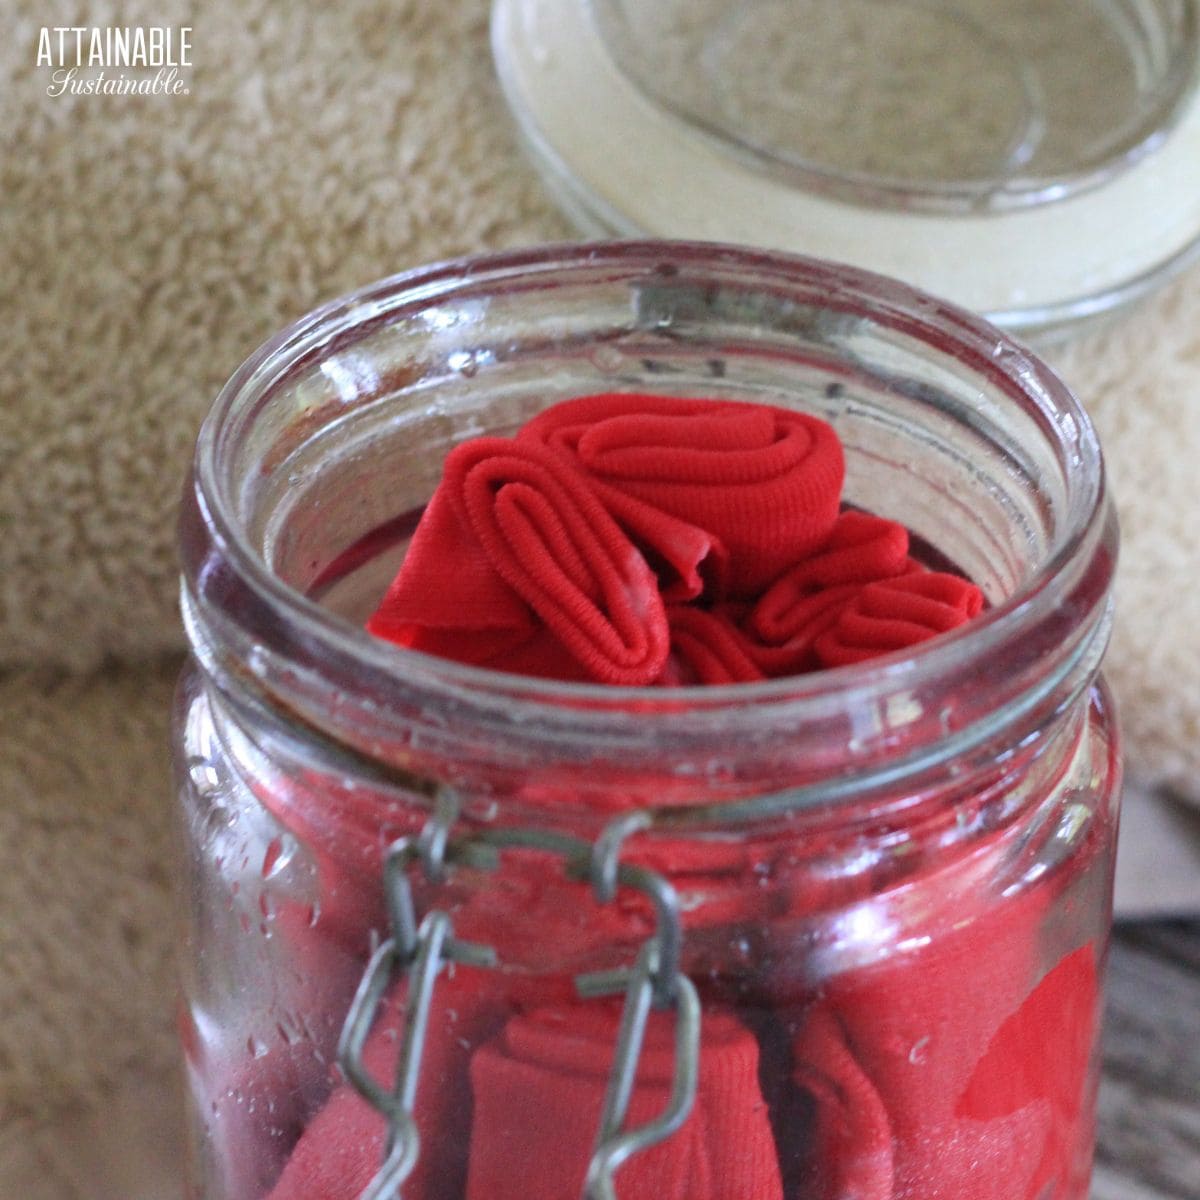 Save money and avoid toxic store bought dryer sheets with this DIY